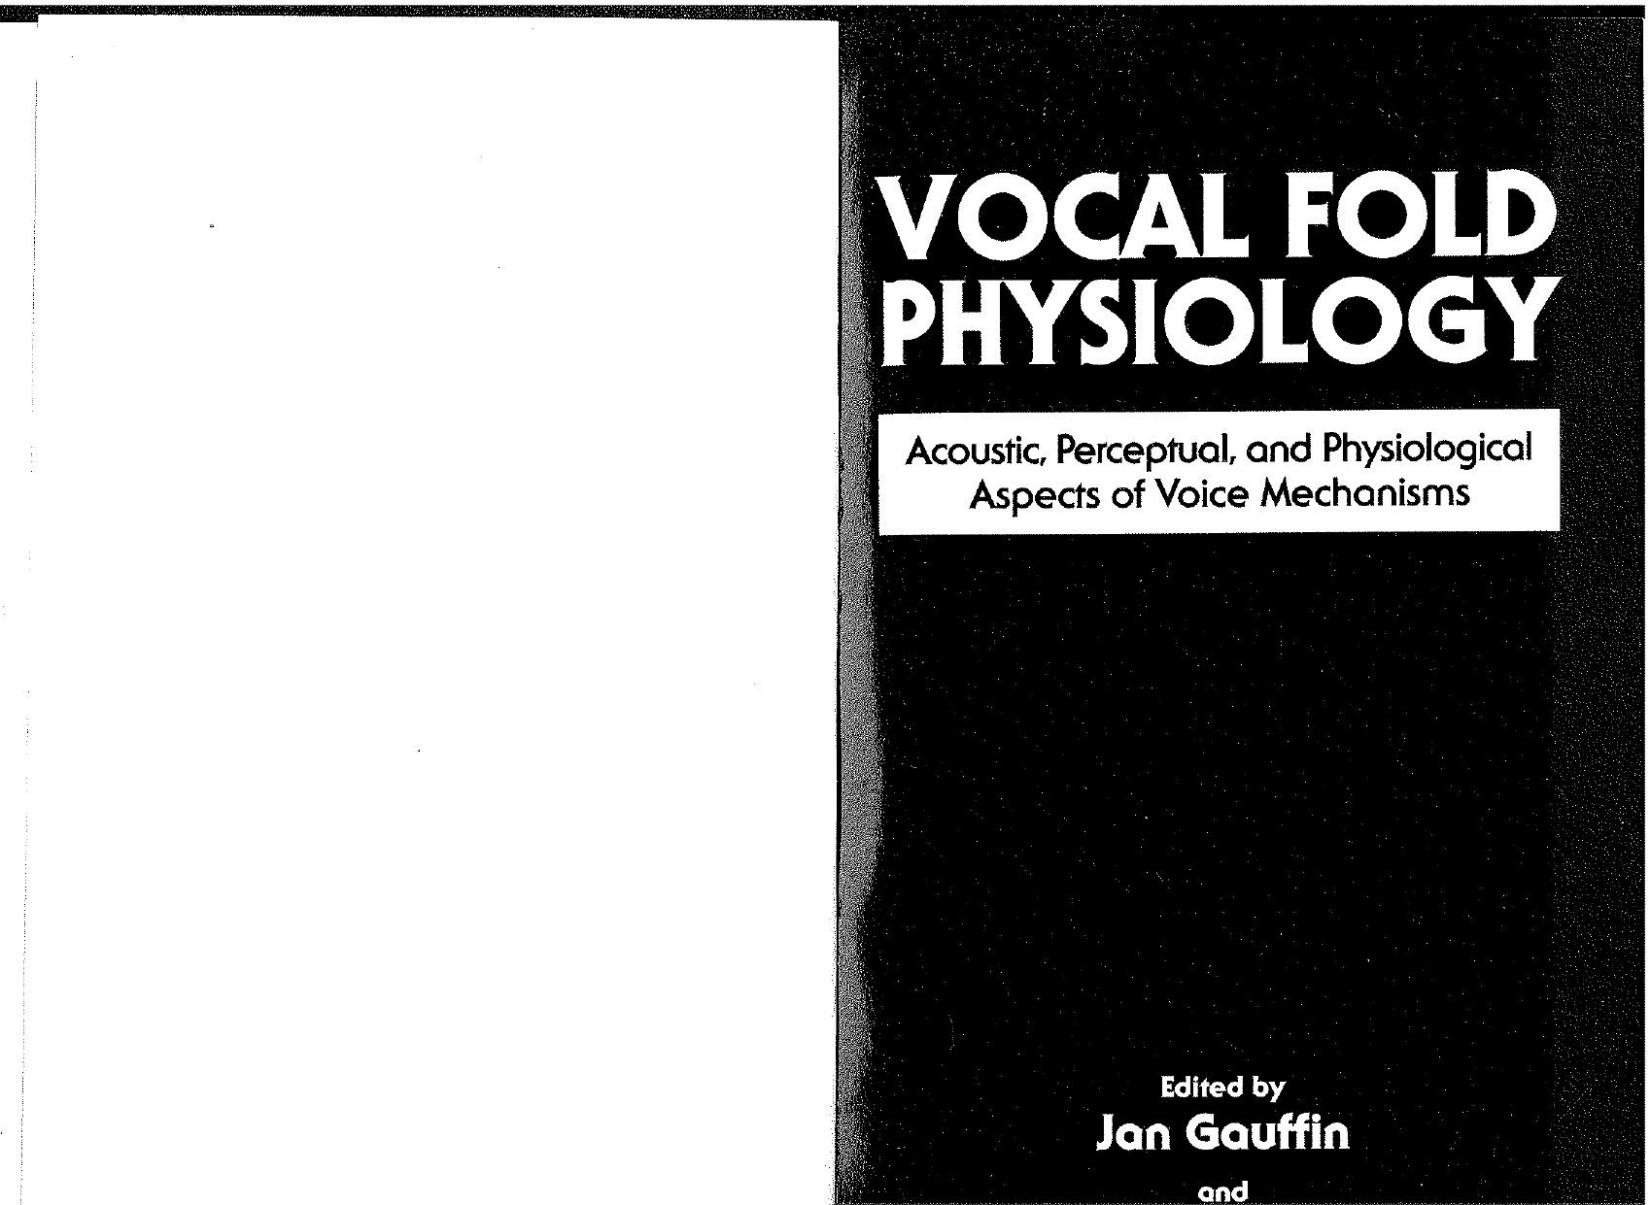 Vocal Fold Physiology  Acoustic, Perceptual and Physiological Aspects of Voice Mechanisms 1991